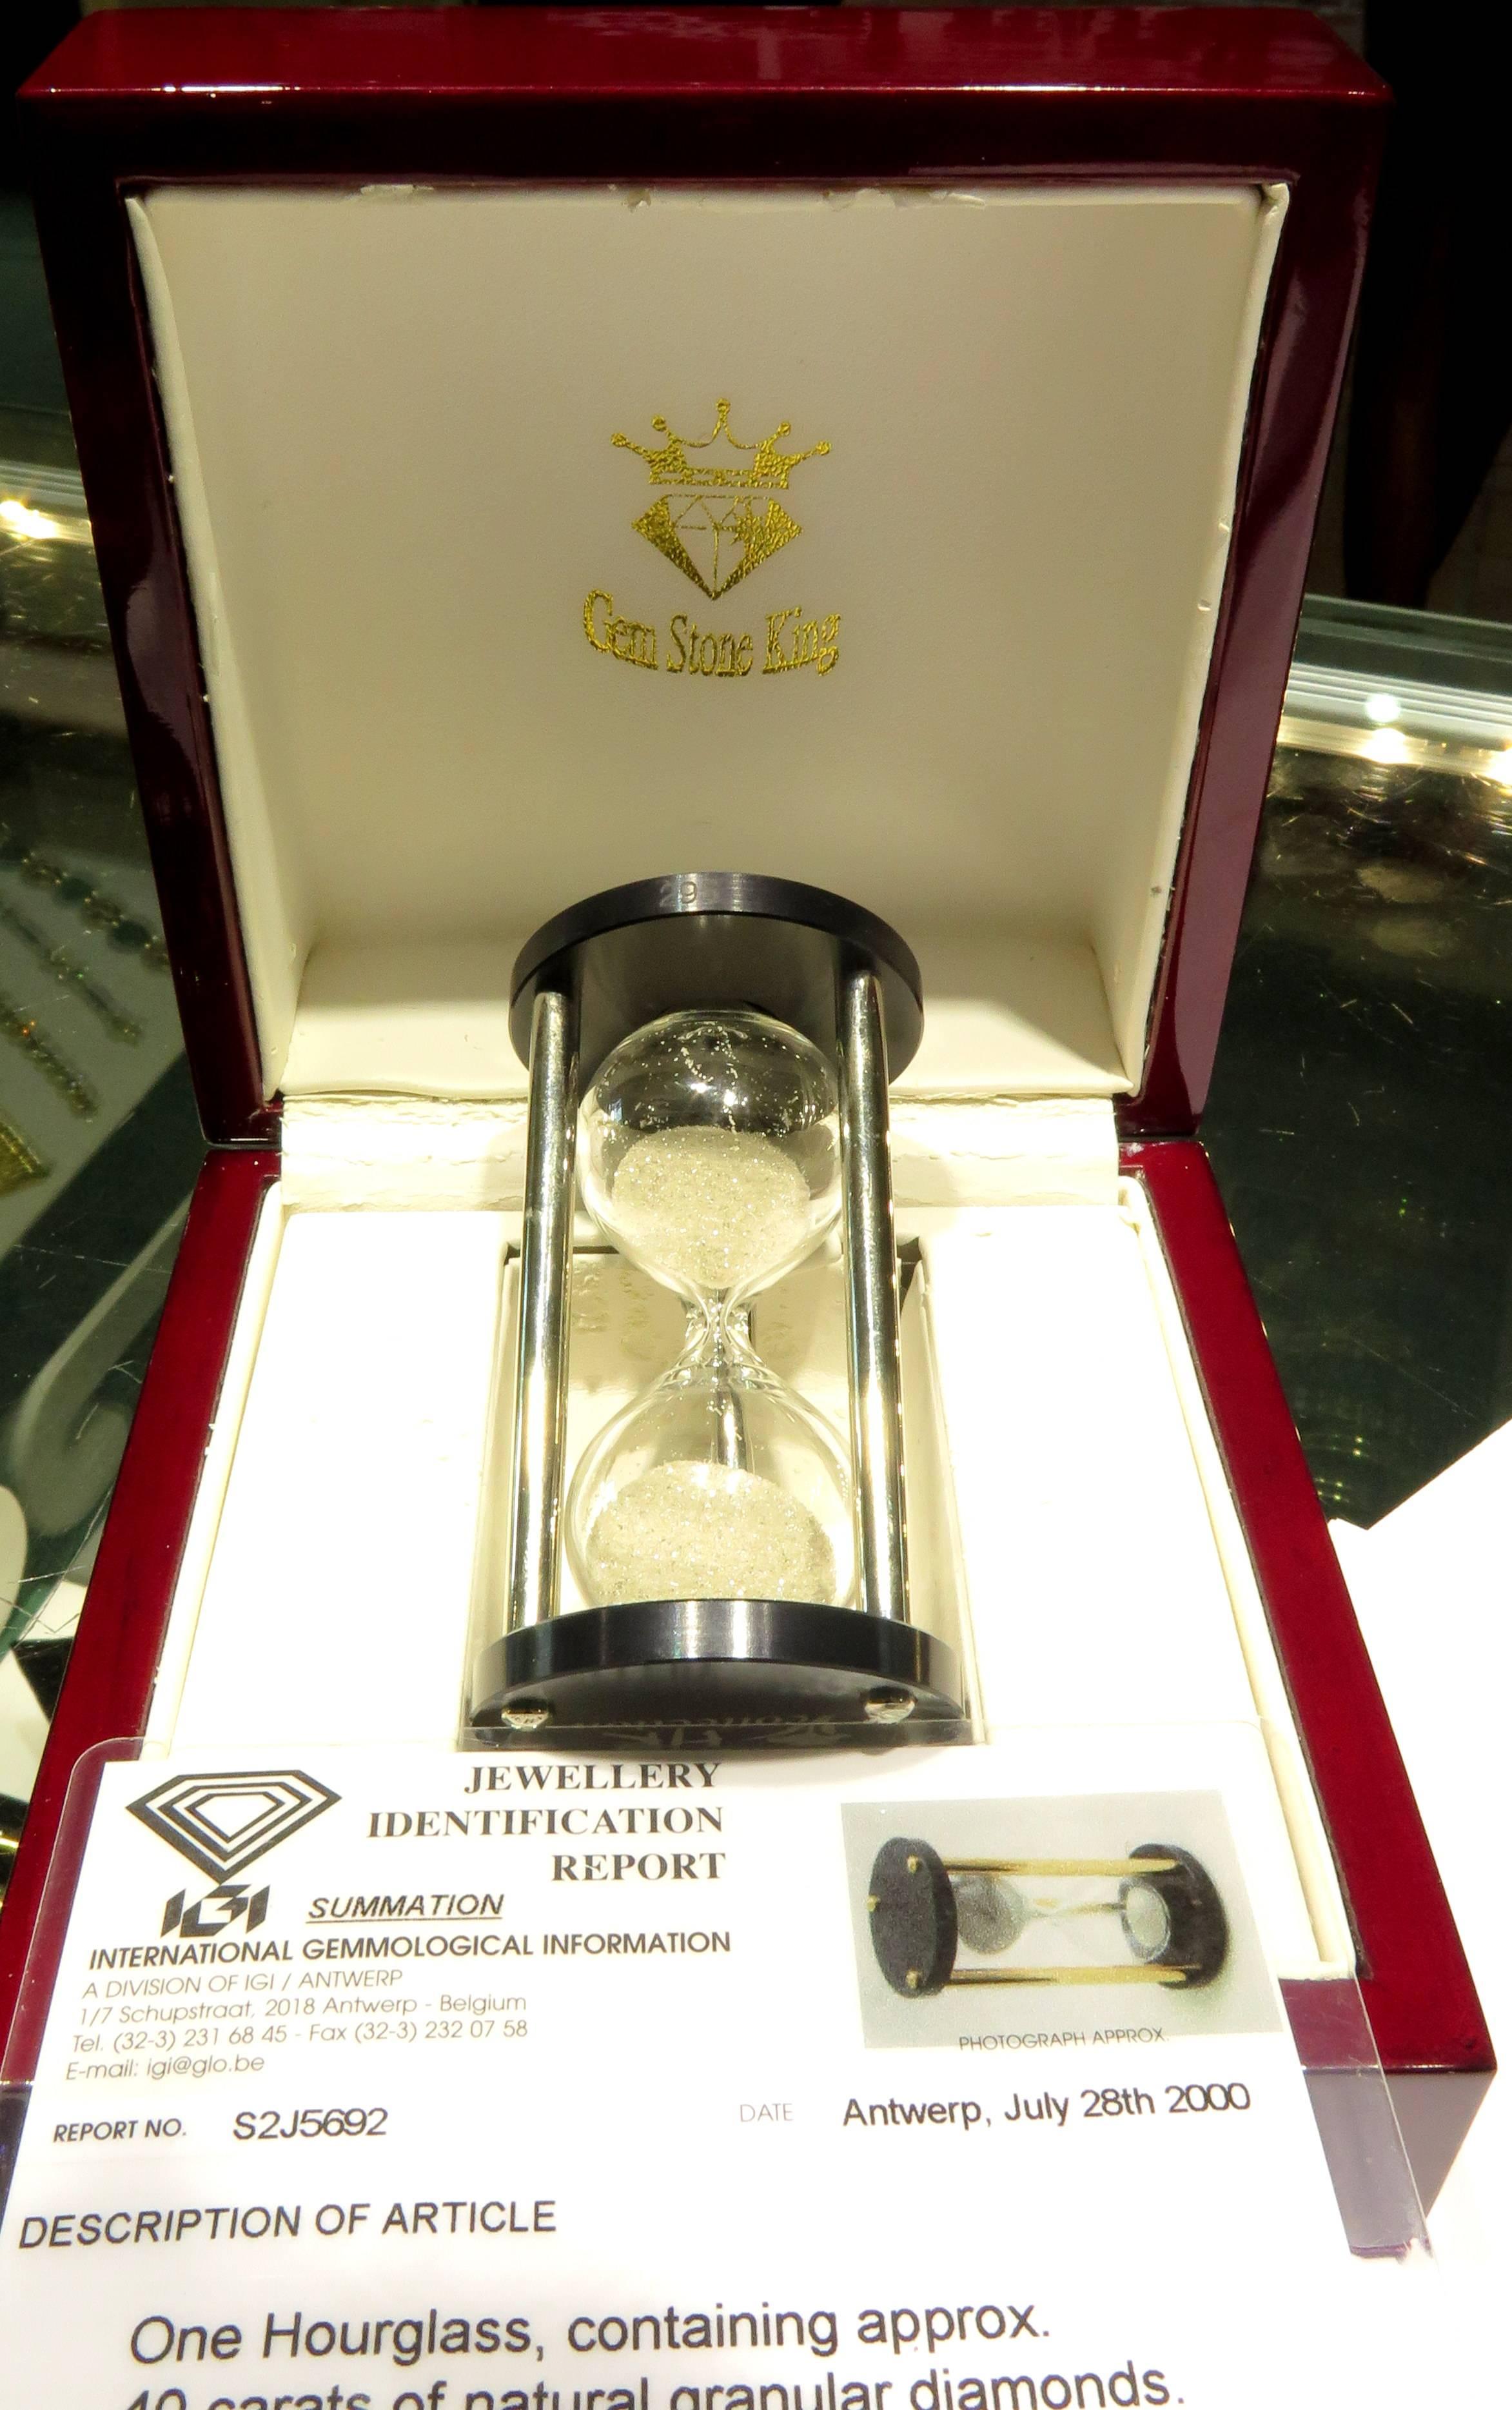 If this isn't the perfect gift for the person who has everything, I don't know what is.This 1 minute, hourglass, has been either right on or off by the most, 2 seconds, each time I've timed it. This hourglass comes in a fitted box with a Jewellery